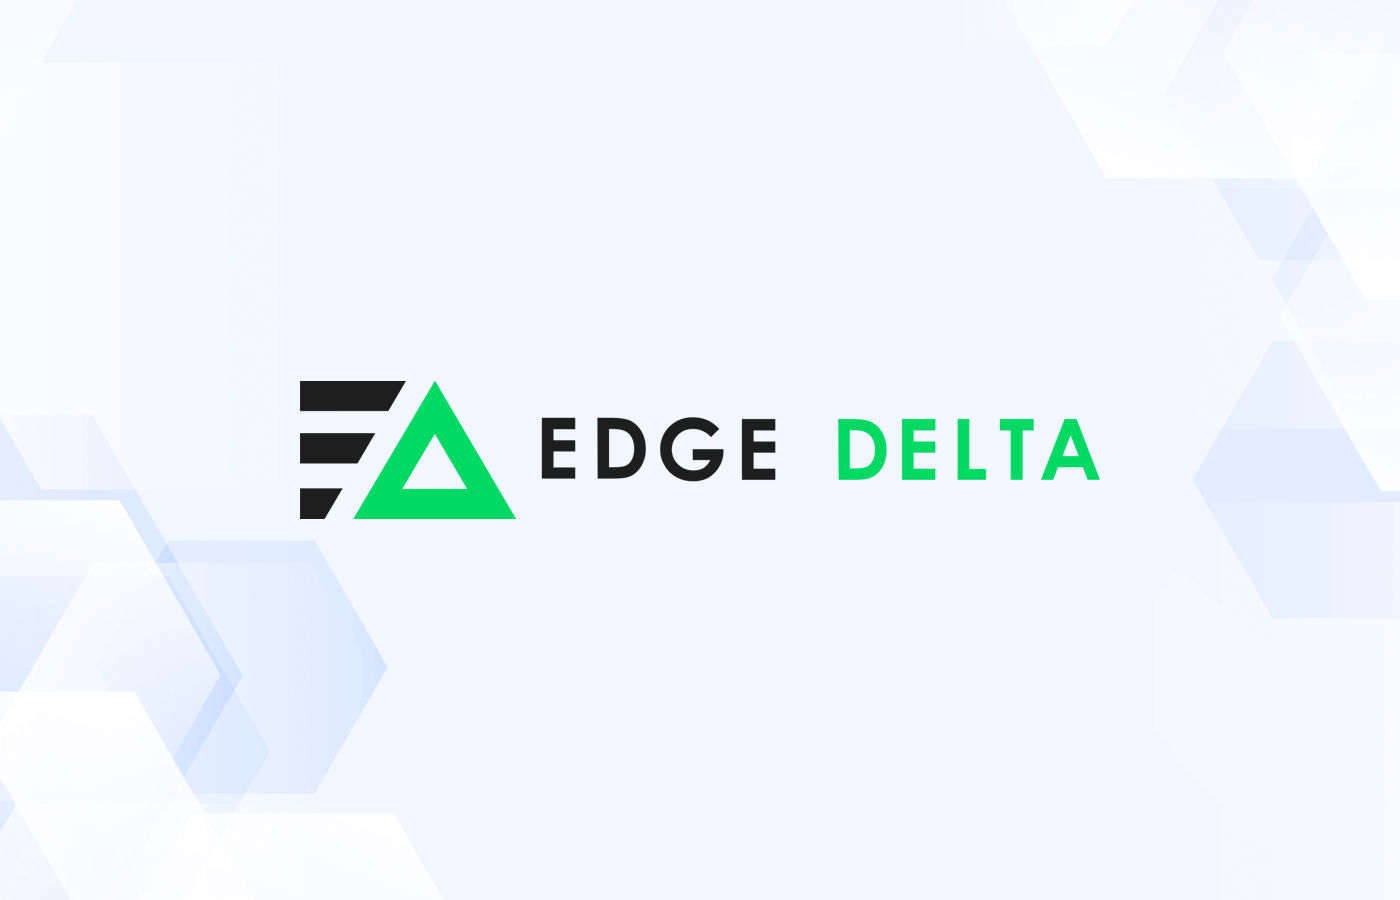 Edge Delta CEO on Scalable Observability for a Data-Rich World